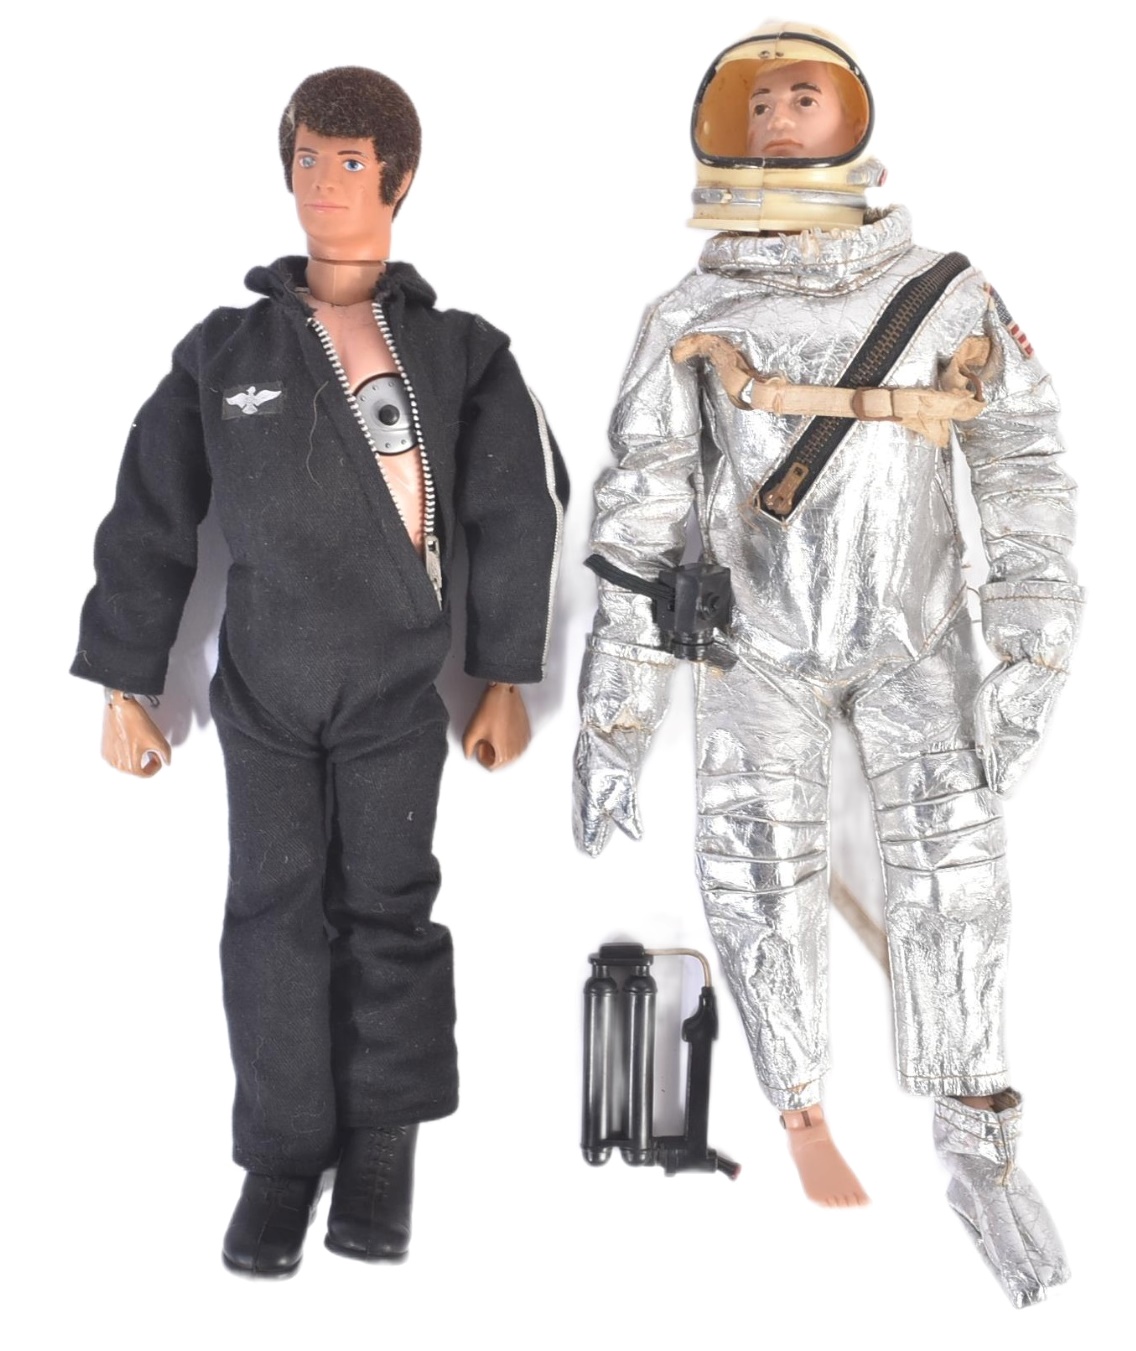 TWO VINTAGE PALITOY ACTION MAN ACTION FIGURES